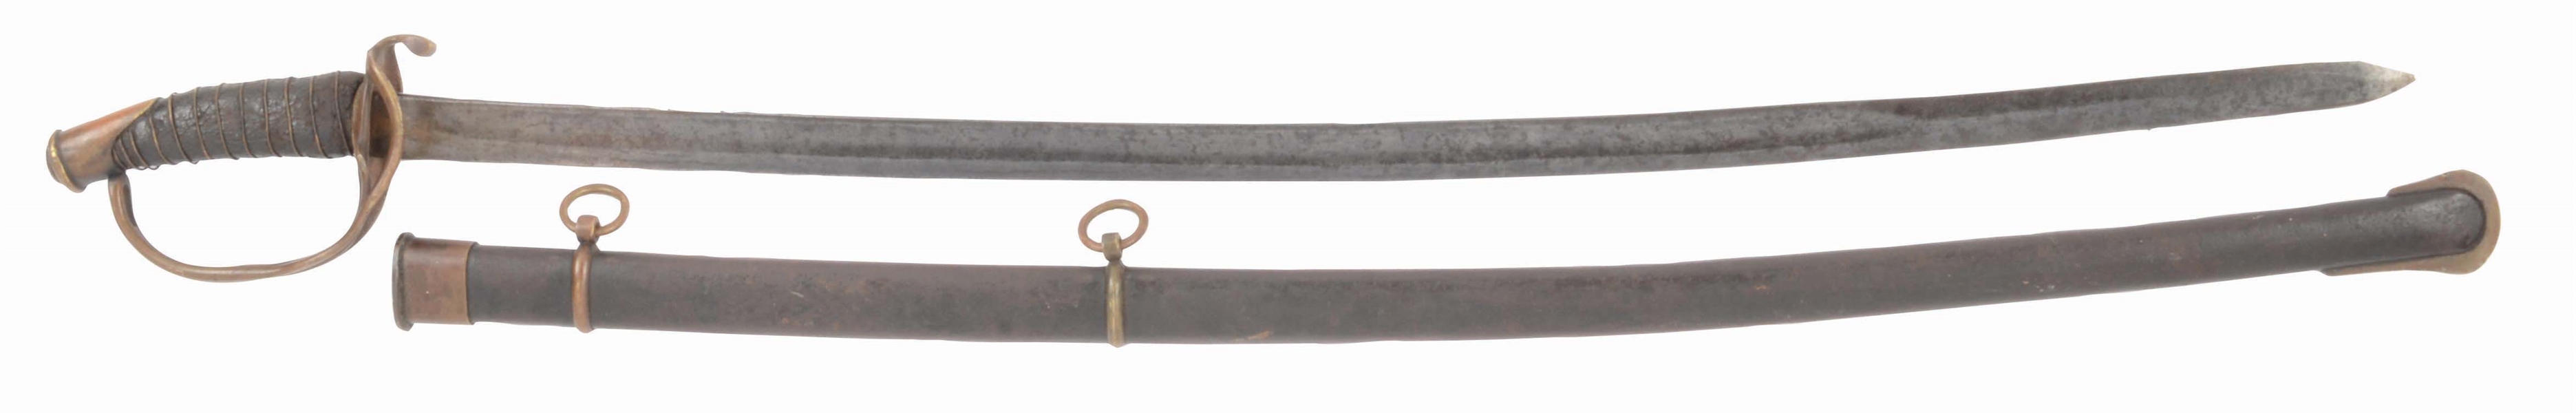 UNMARKED CONFEDERATE FOOT OFFICER’S SWORD AND SCABBARD, ATTRIBUTED TO BOYLE & GAMBLE, RICHMOND, VIRGINIA. 